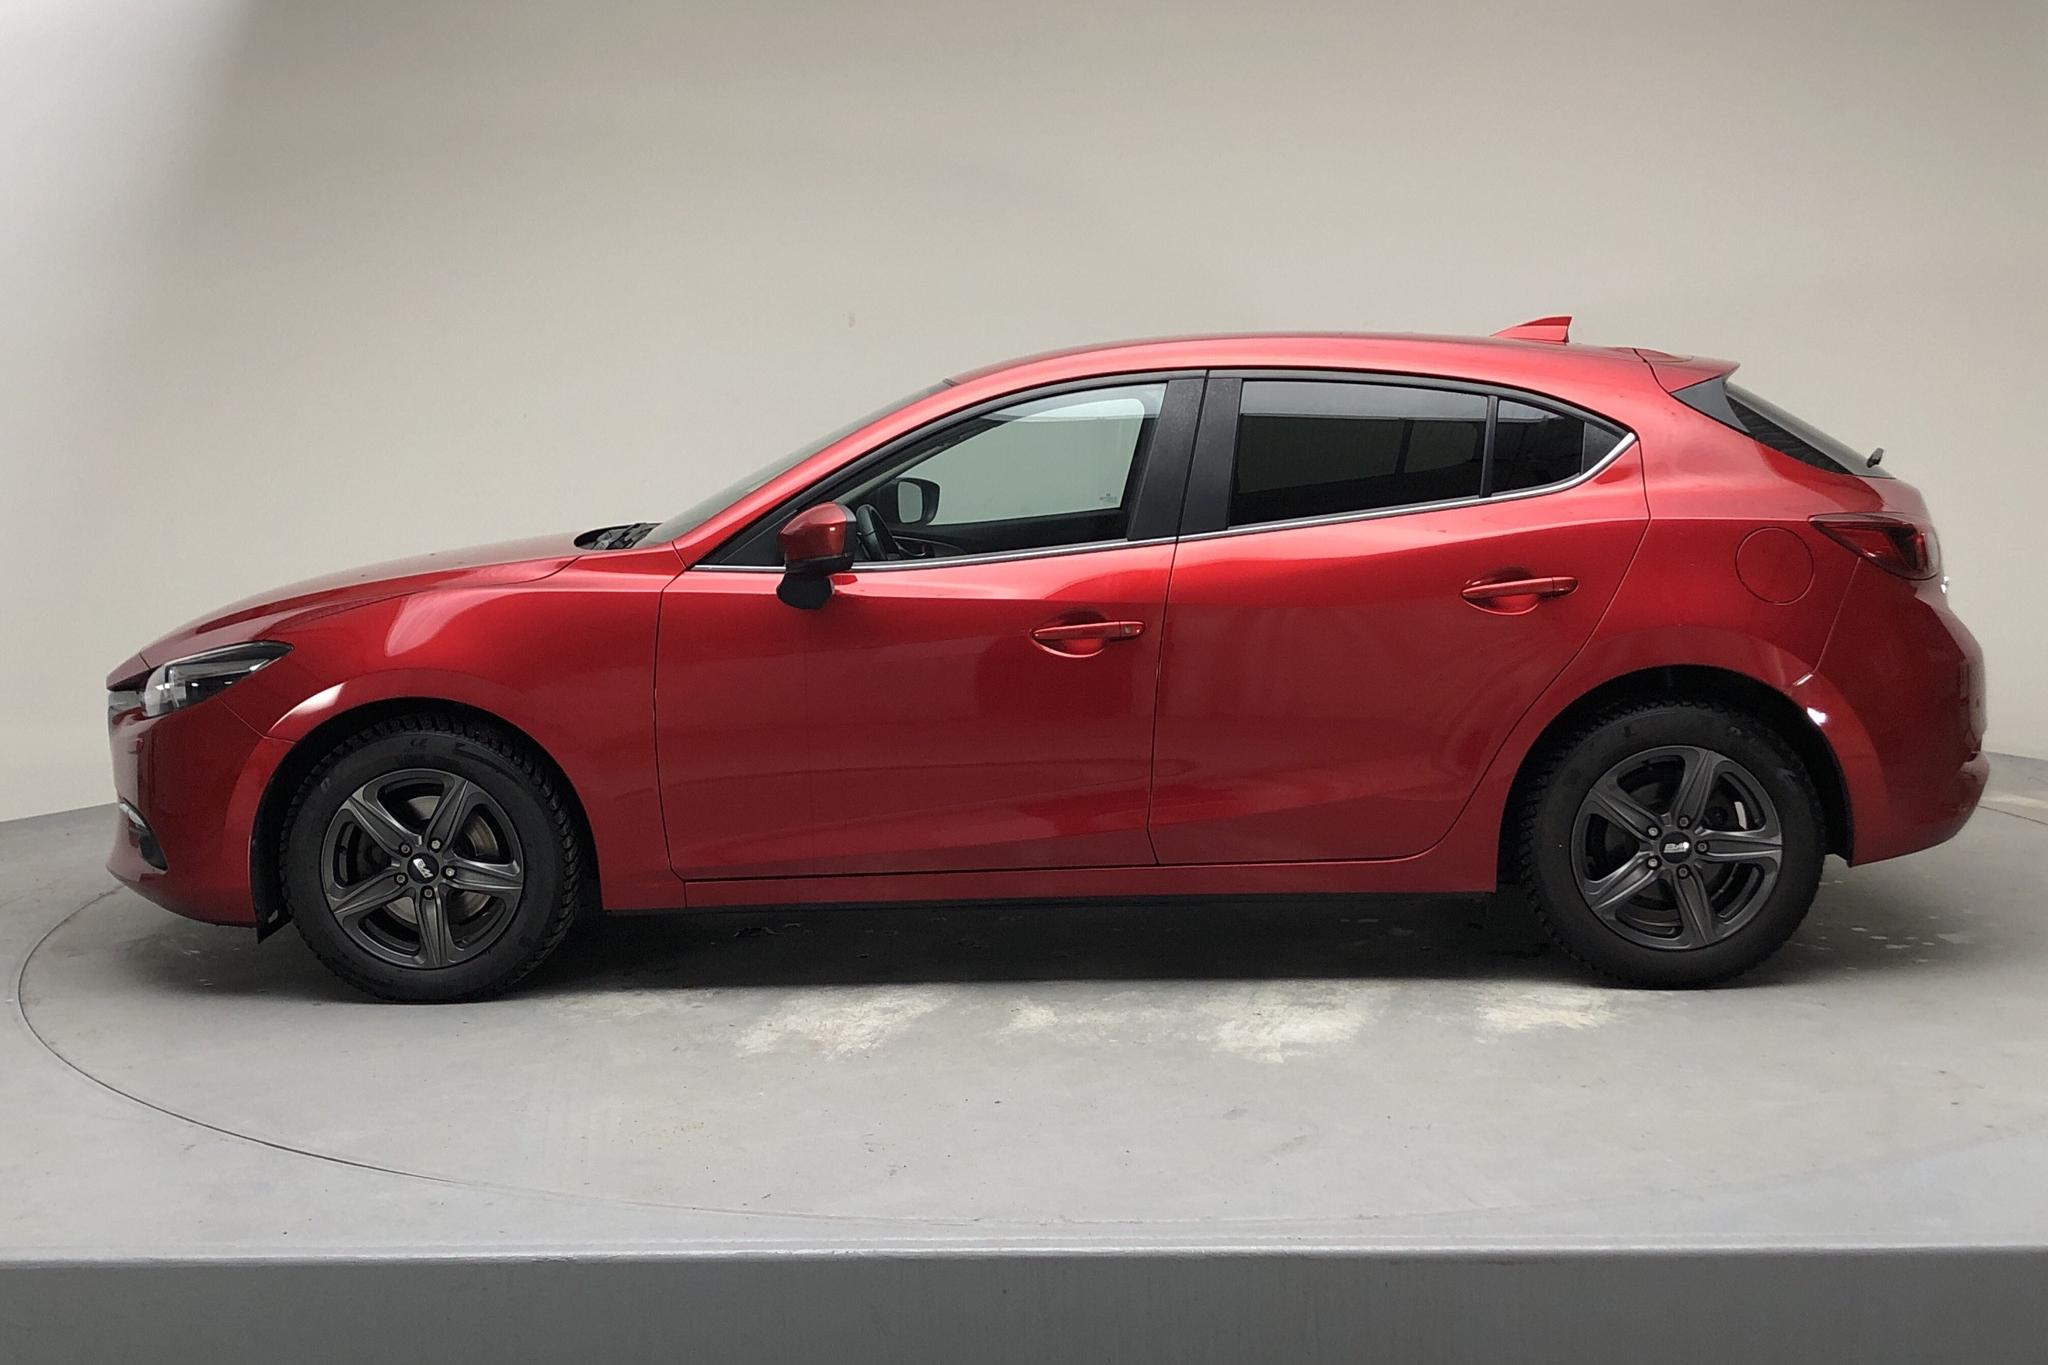 Mazda 3 2.0 5dr (120hk) - 41 490 km - Automatic - red - 2018